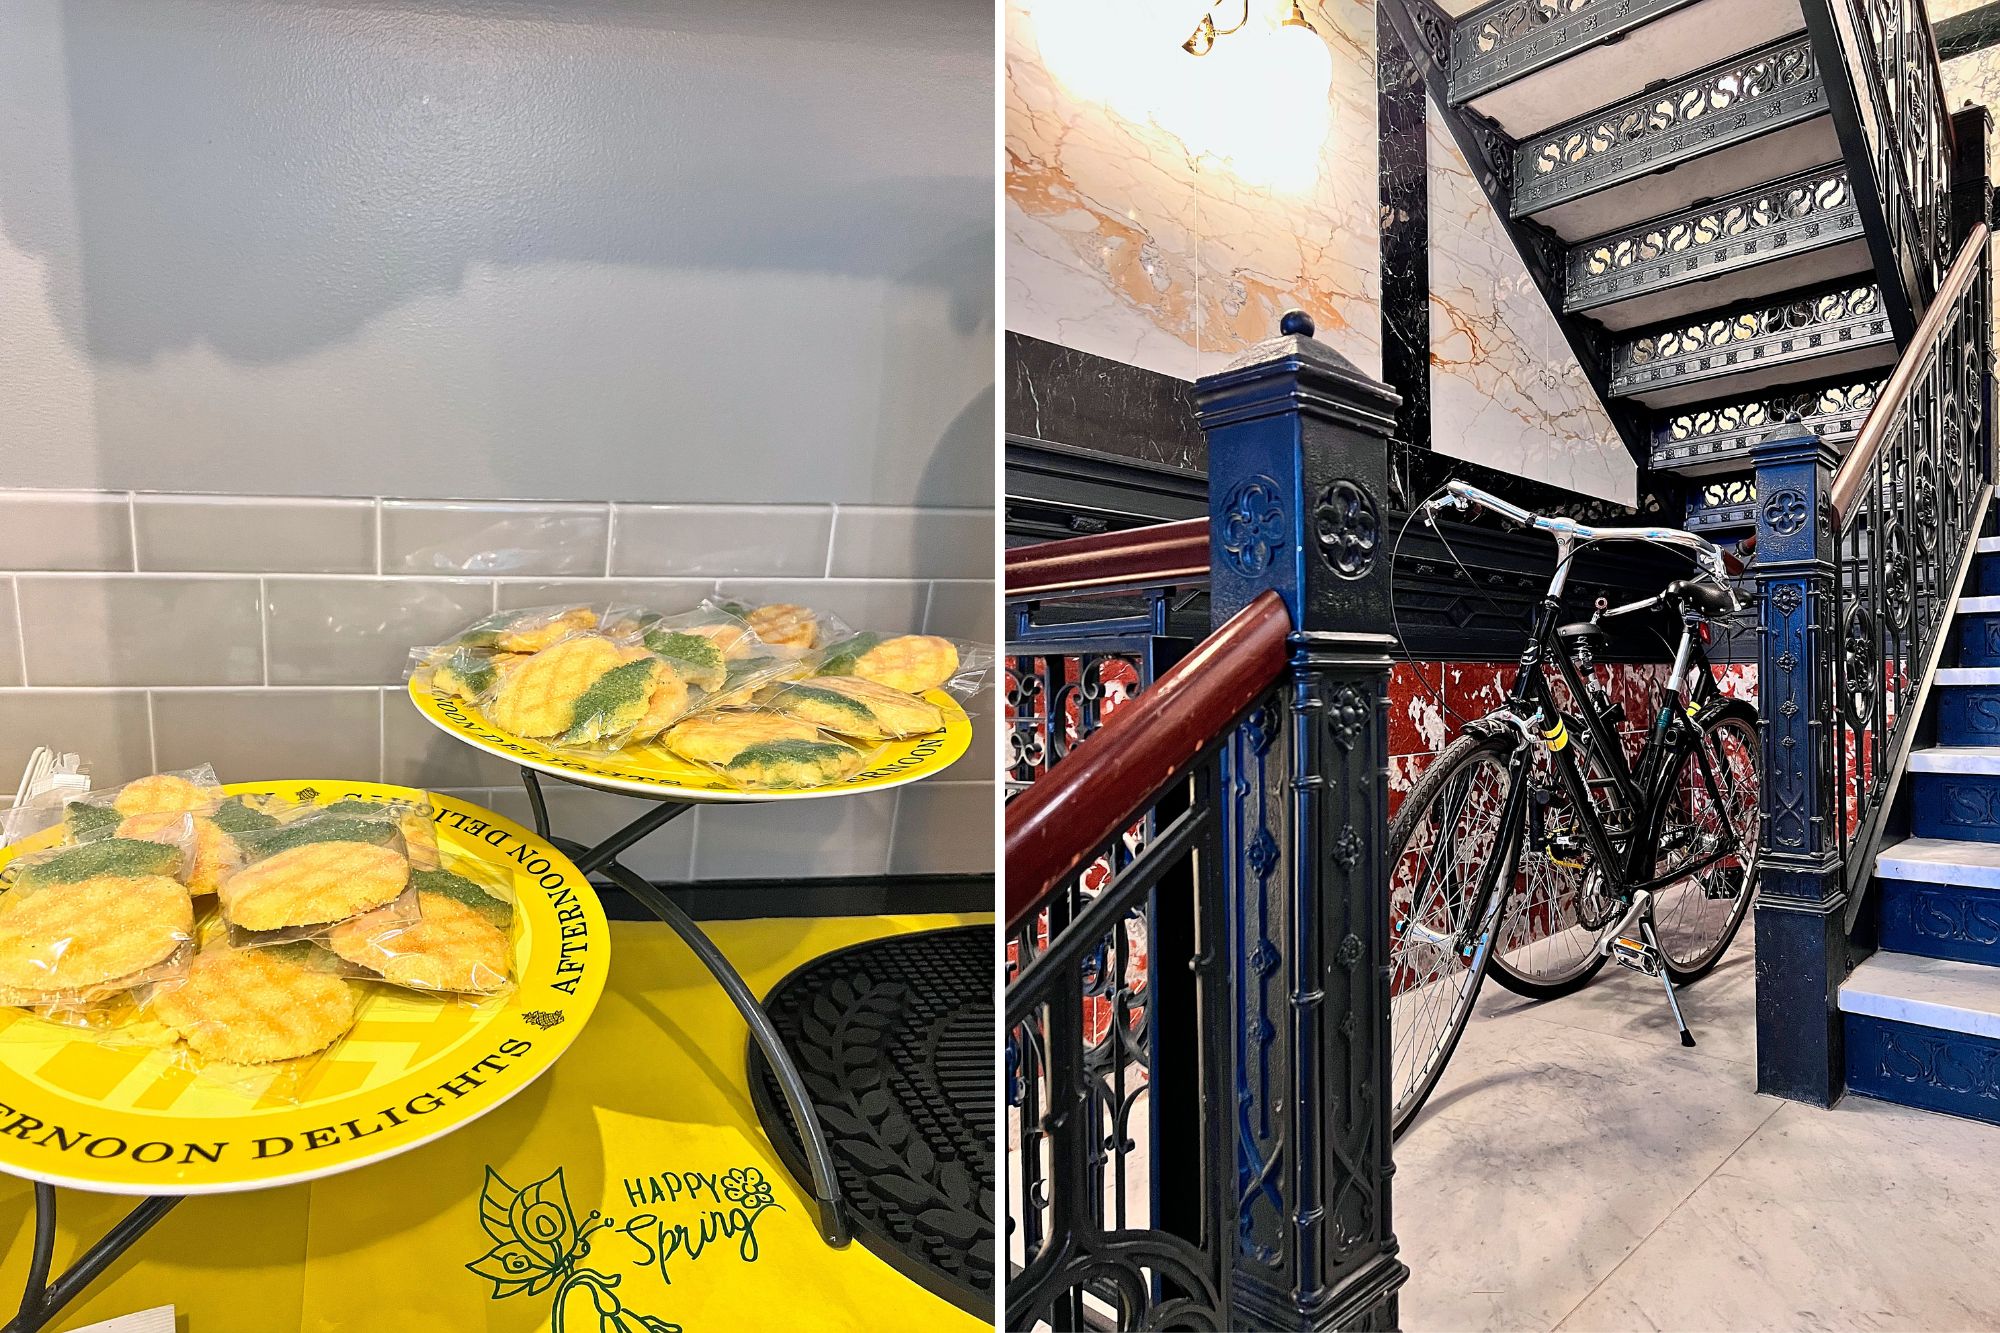 Two photos of amenities at Staypineapple: Pineapple-shaped cookies, and bicycles for borrowing